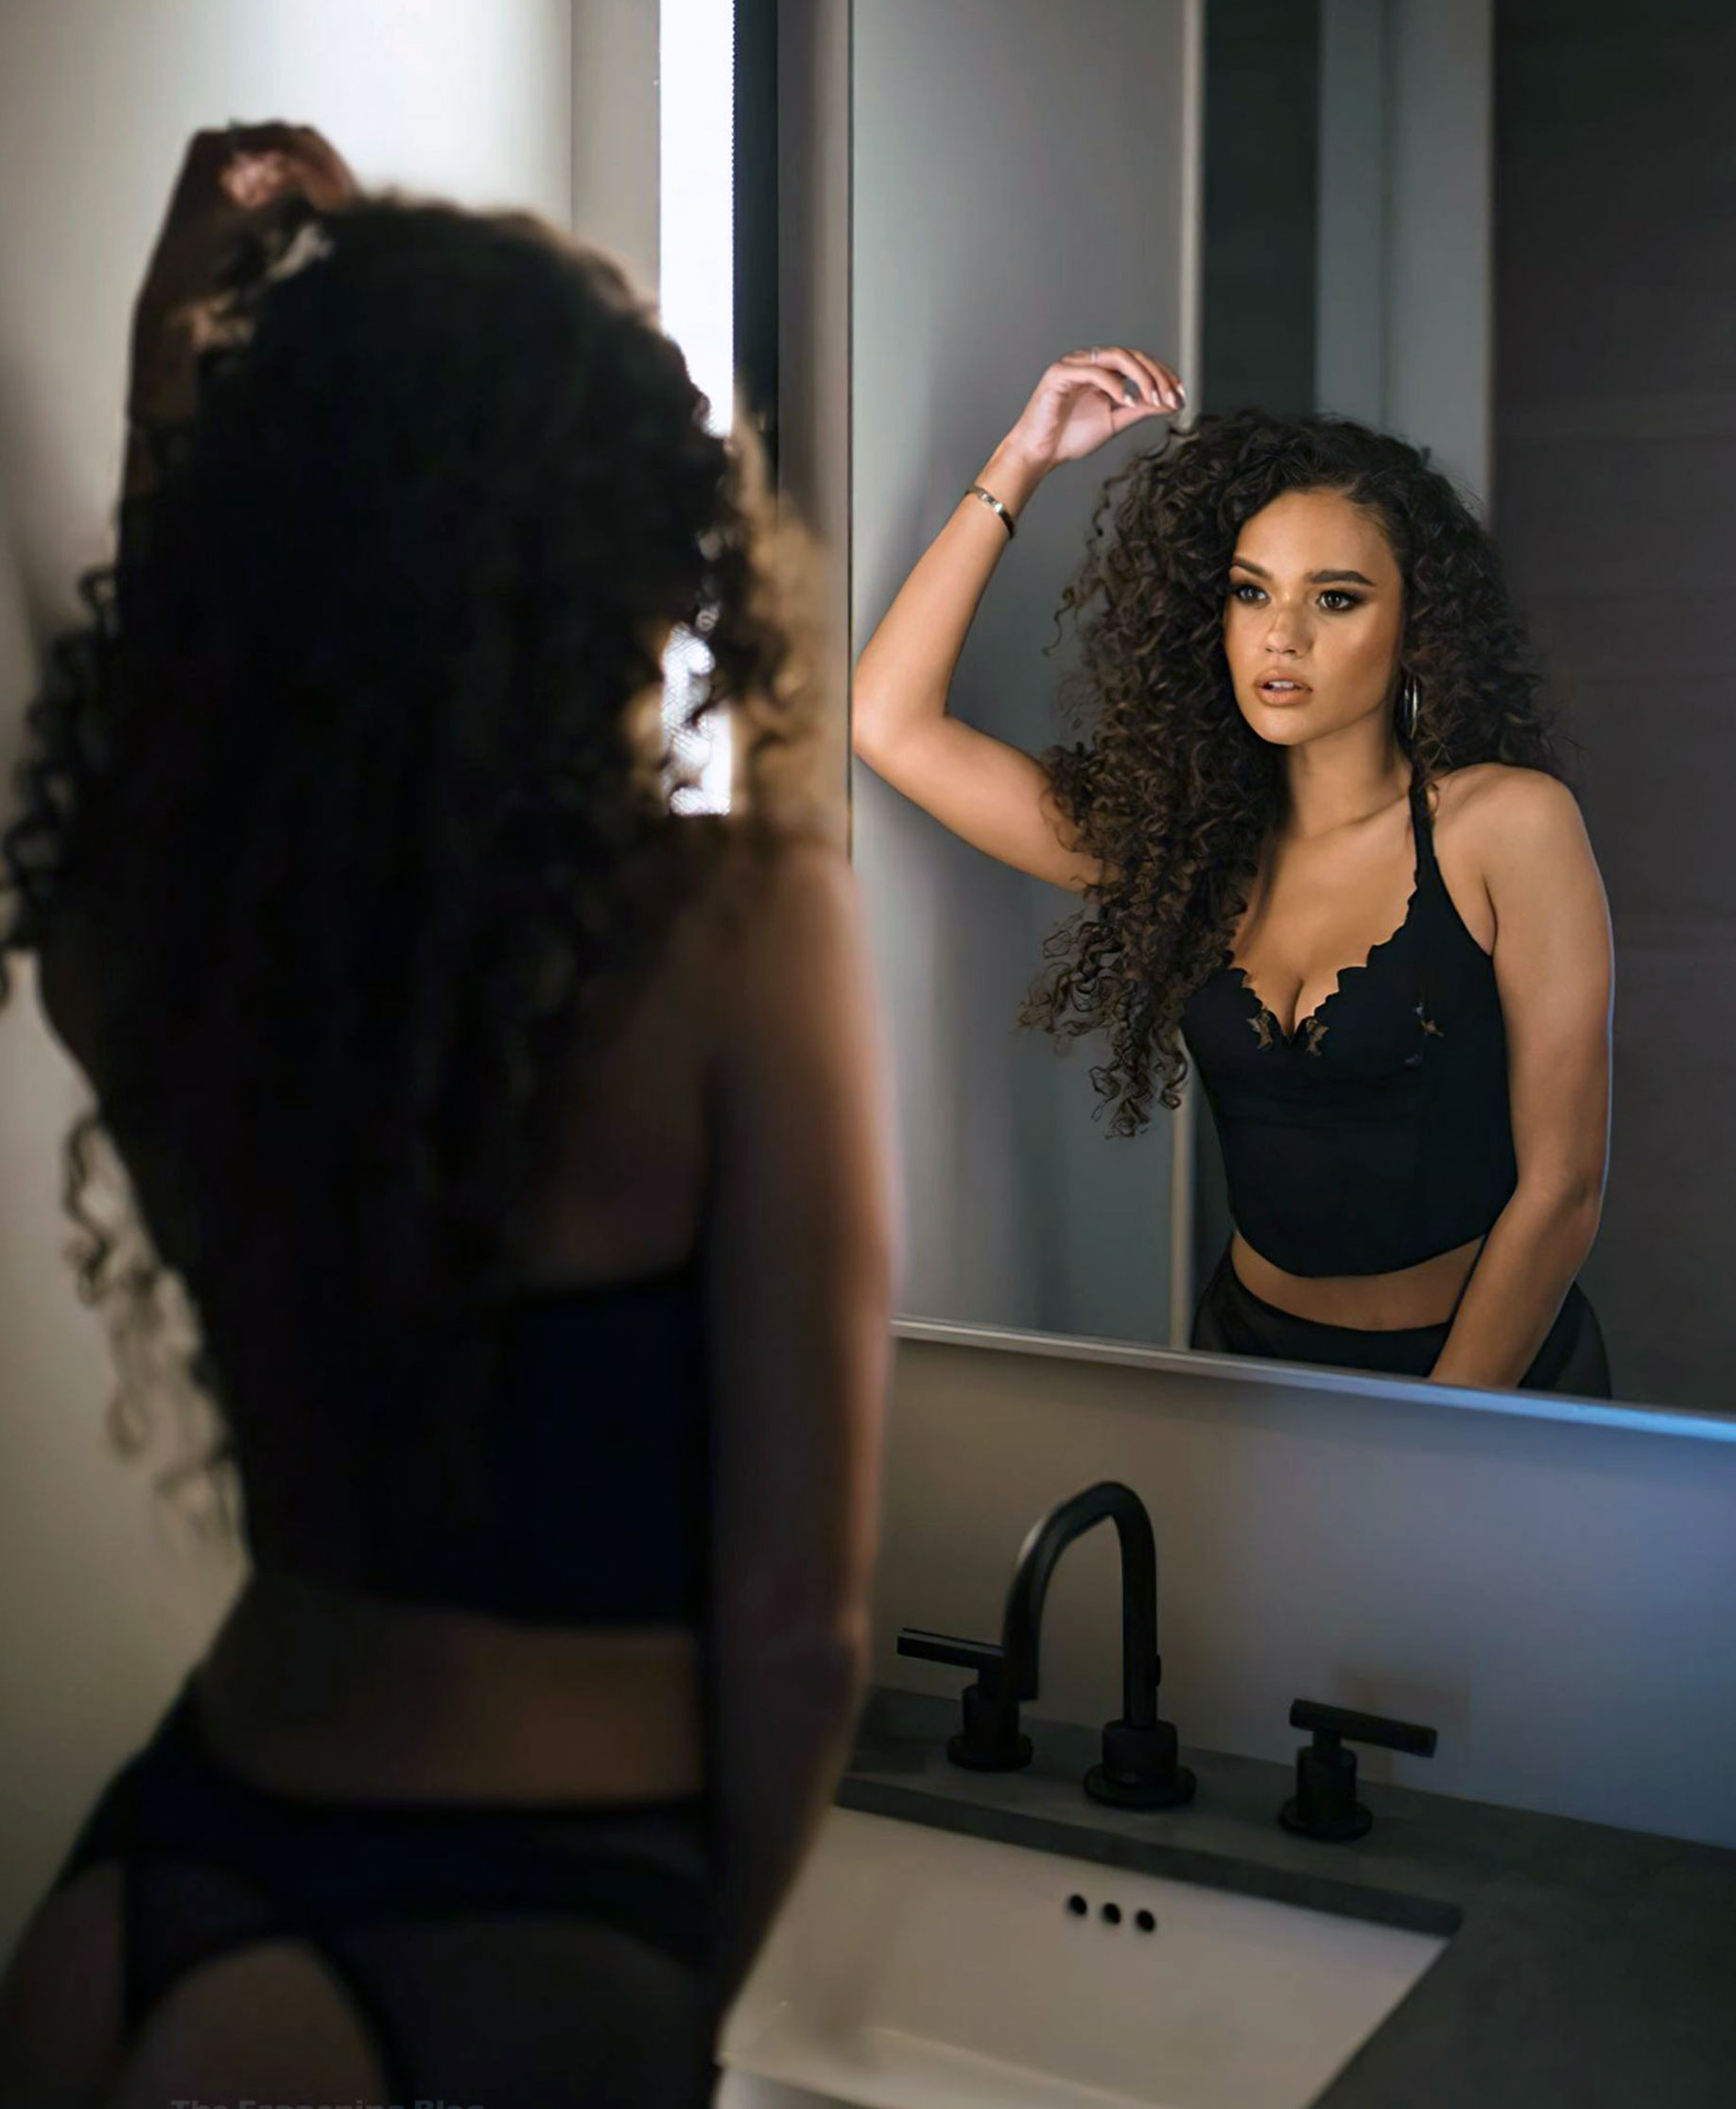 Madison Pettis Nude and Sexy Lingerie Photos.